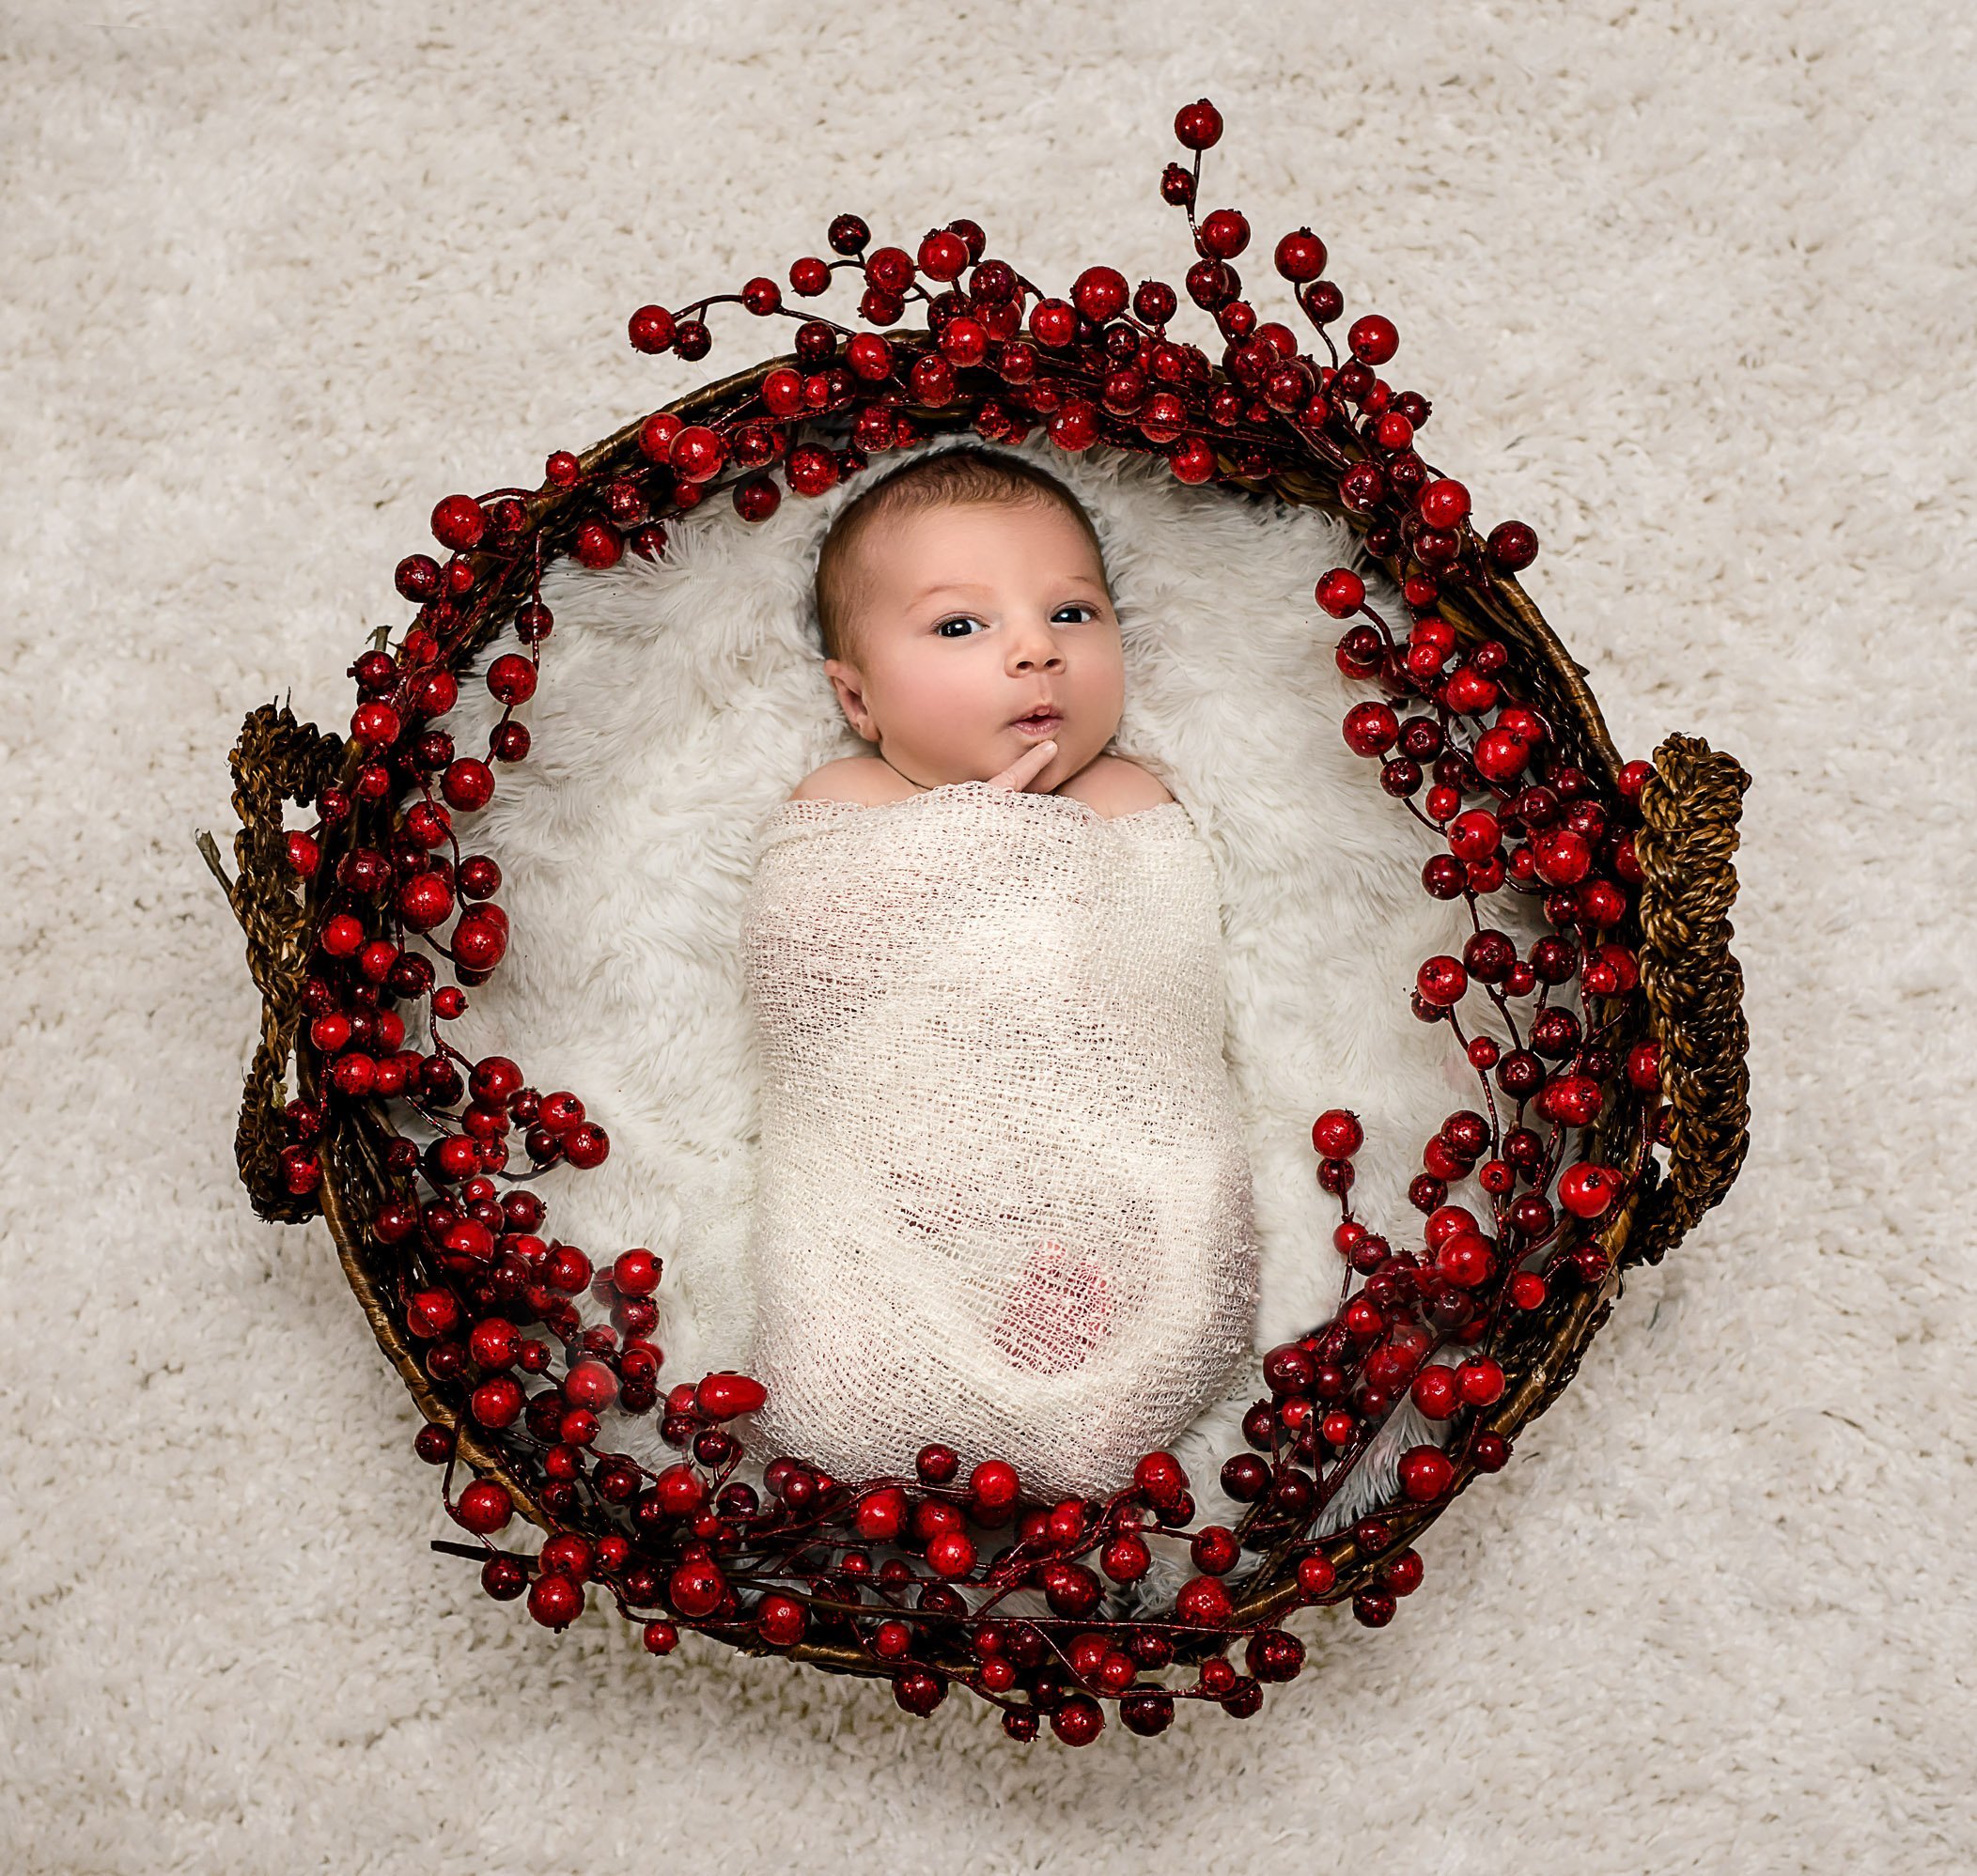 newborn Christmas photos baby wrapped in white blanket lying in a basket surrounded by christmas berries